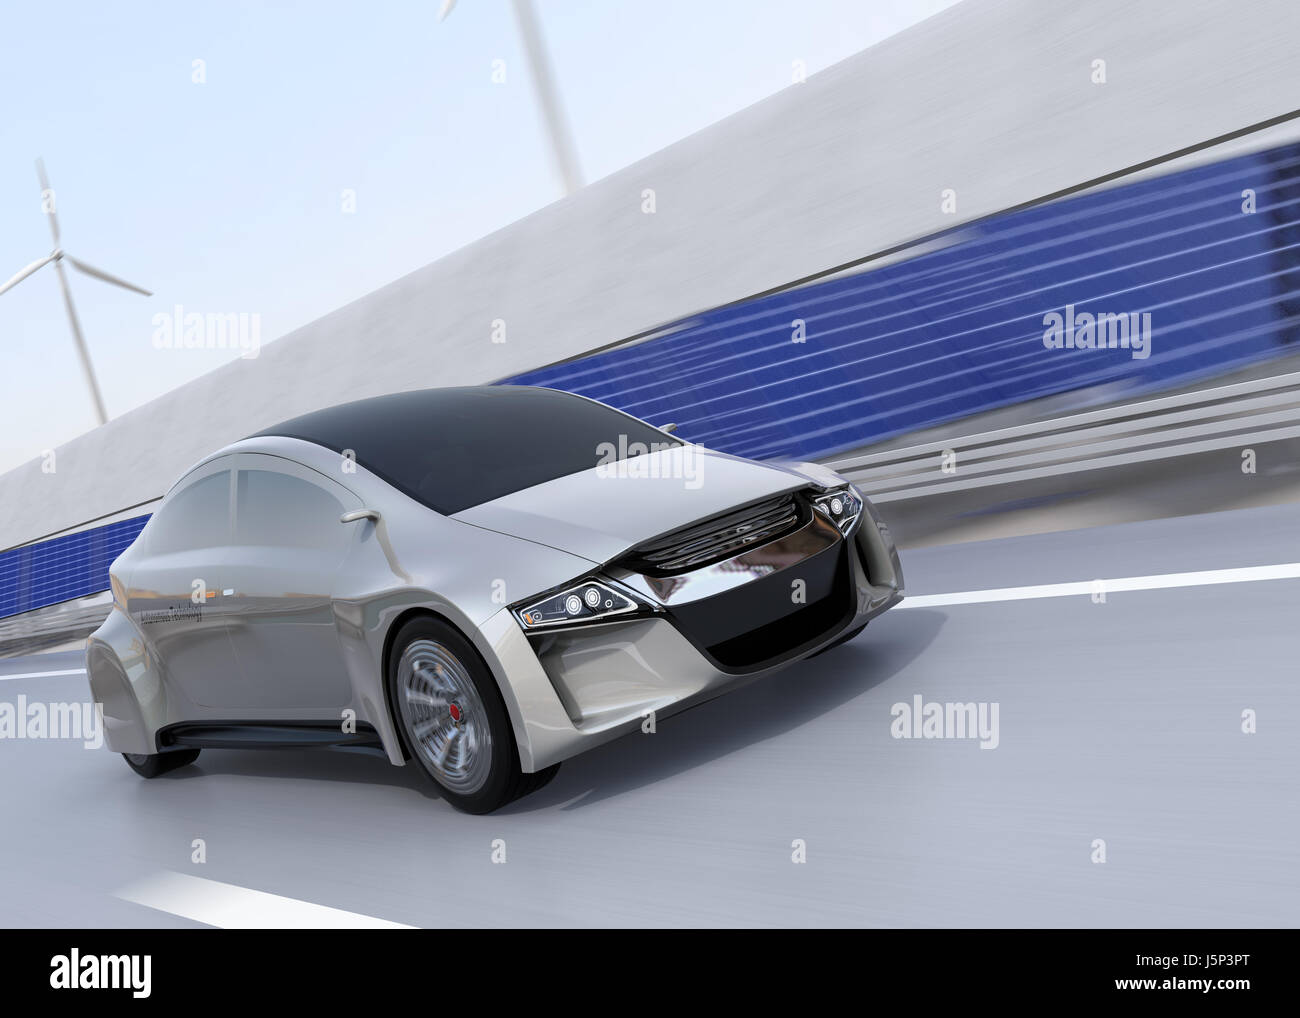 Electric car driving on the wireless charging lane of the highway.  Solar panel station and wind turbine on the roadside. 3D rendering image. Stock Photo